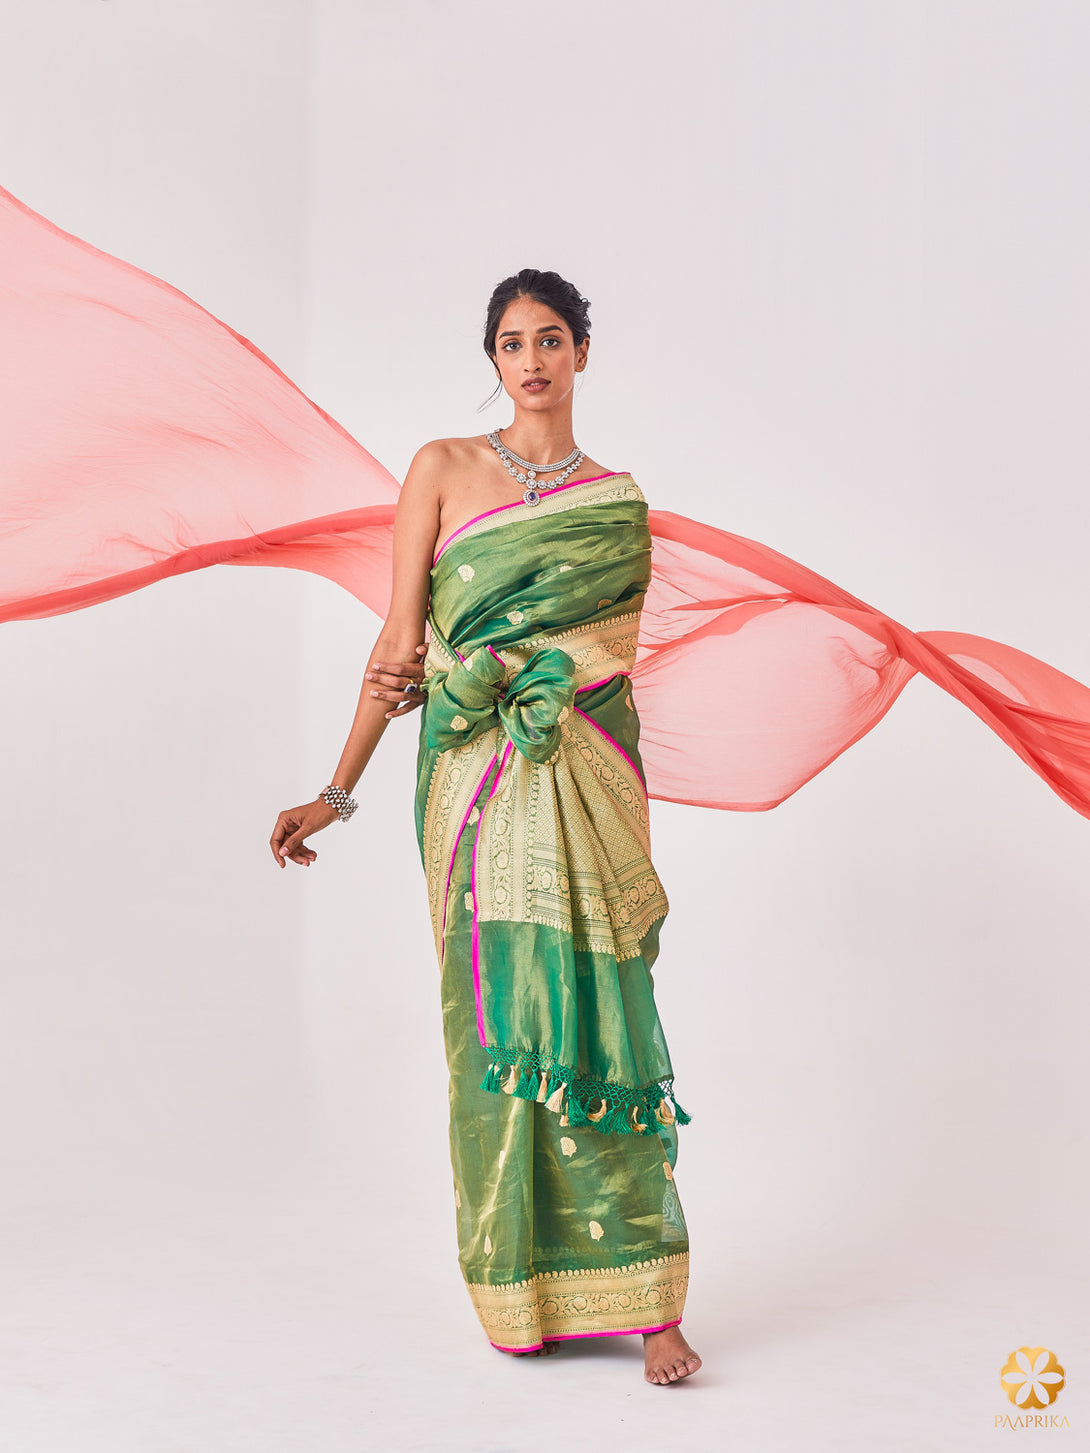 Exquisite Bottle Green and Gold Handwoven Tissue Saree with Contrast Popping Pink Selvedge - Sophistication and Charm Combined.